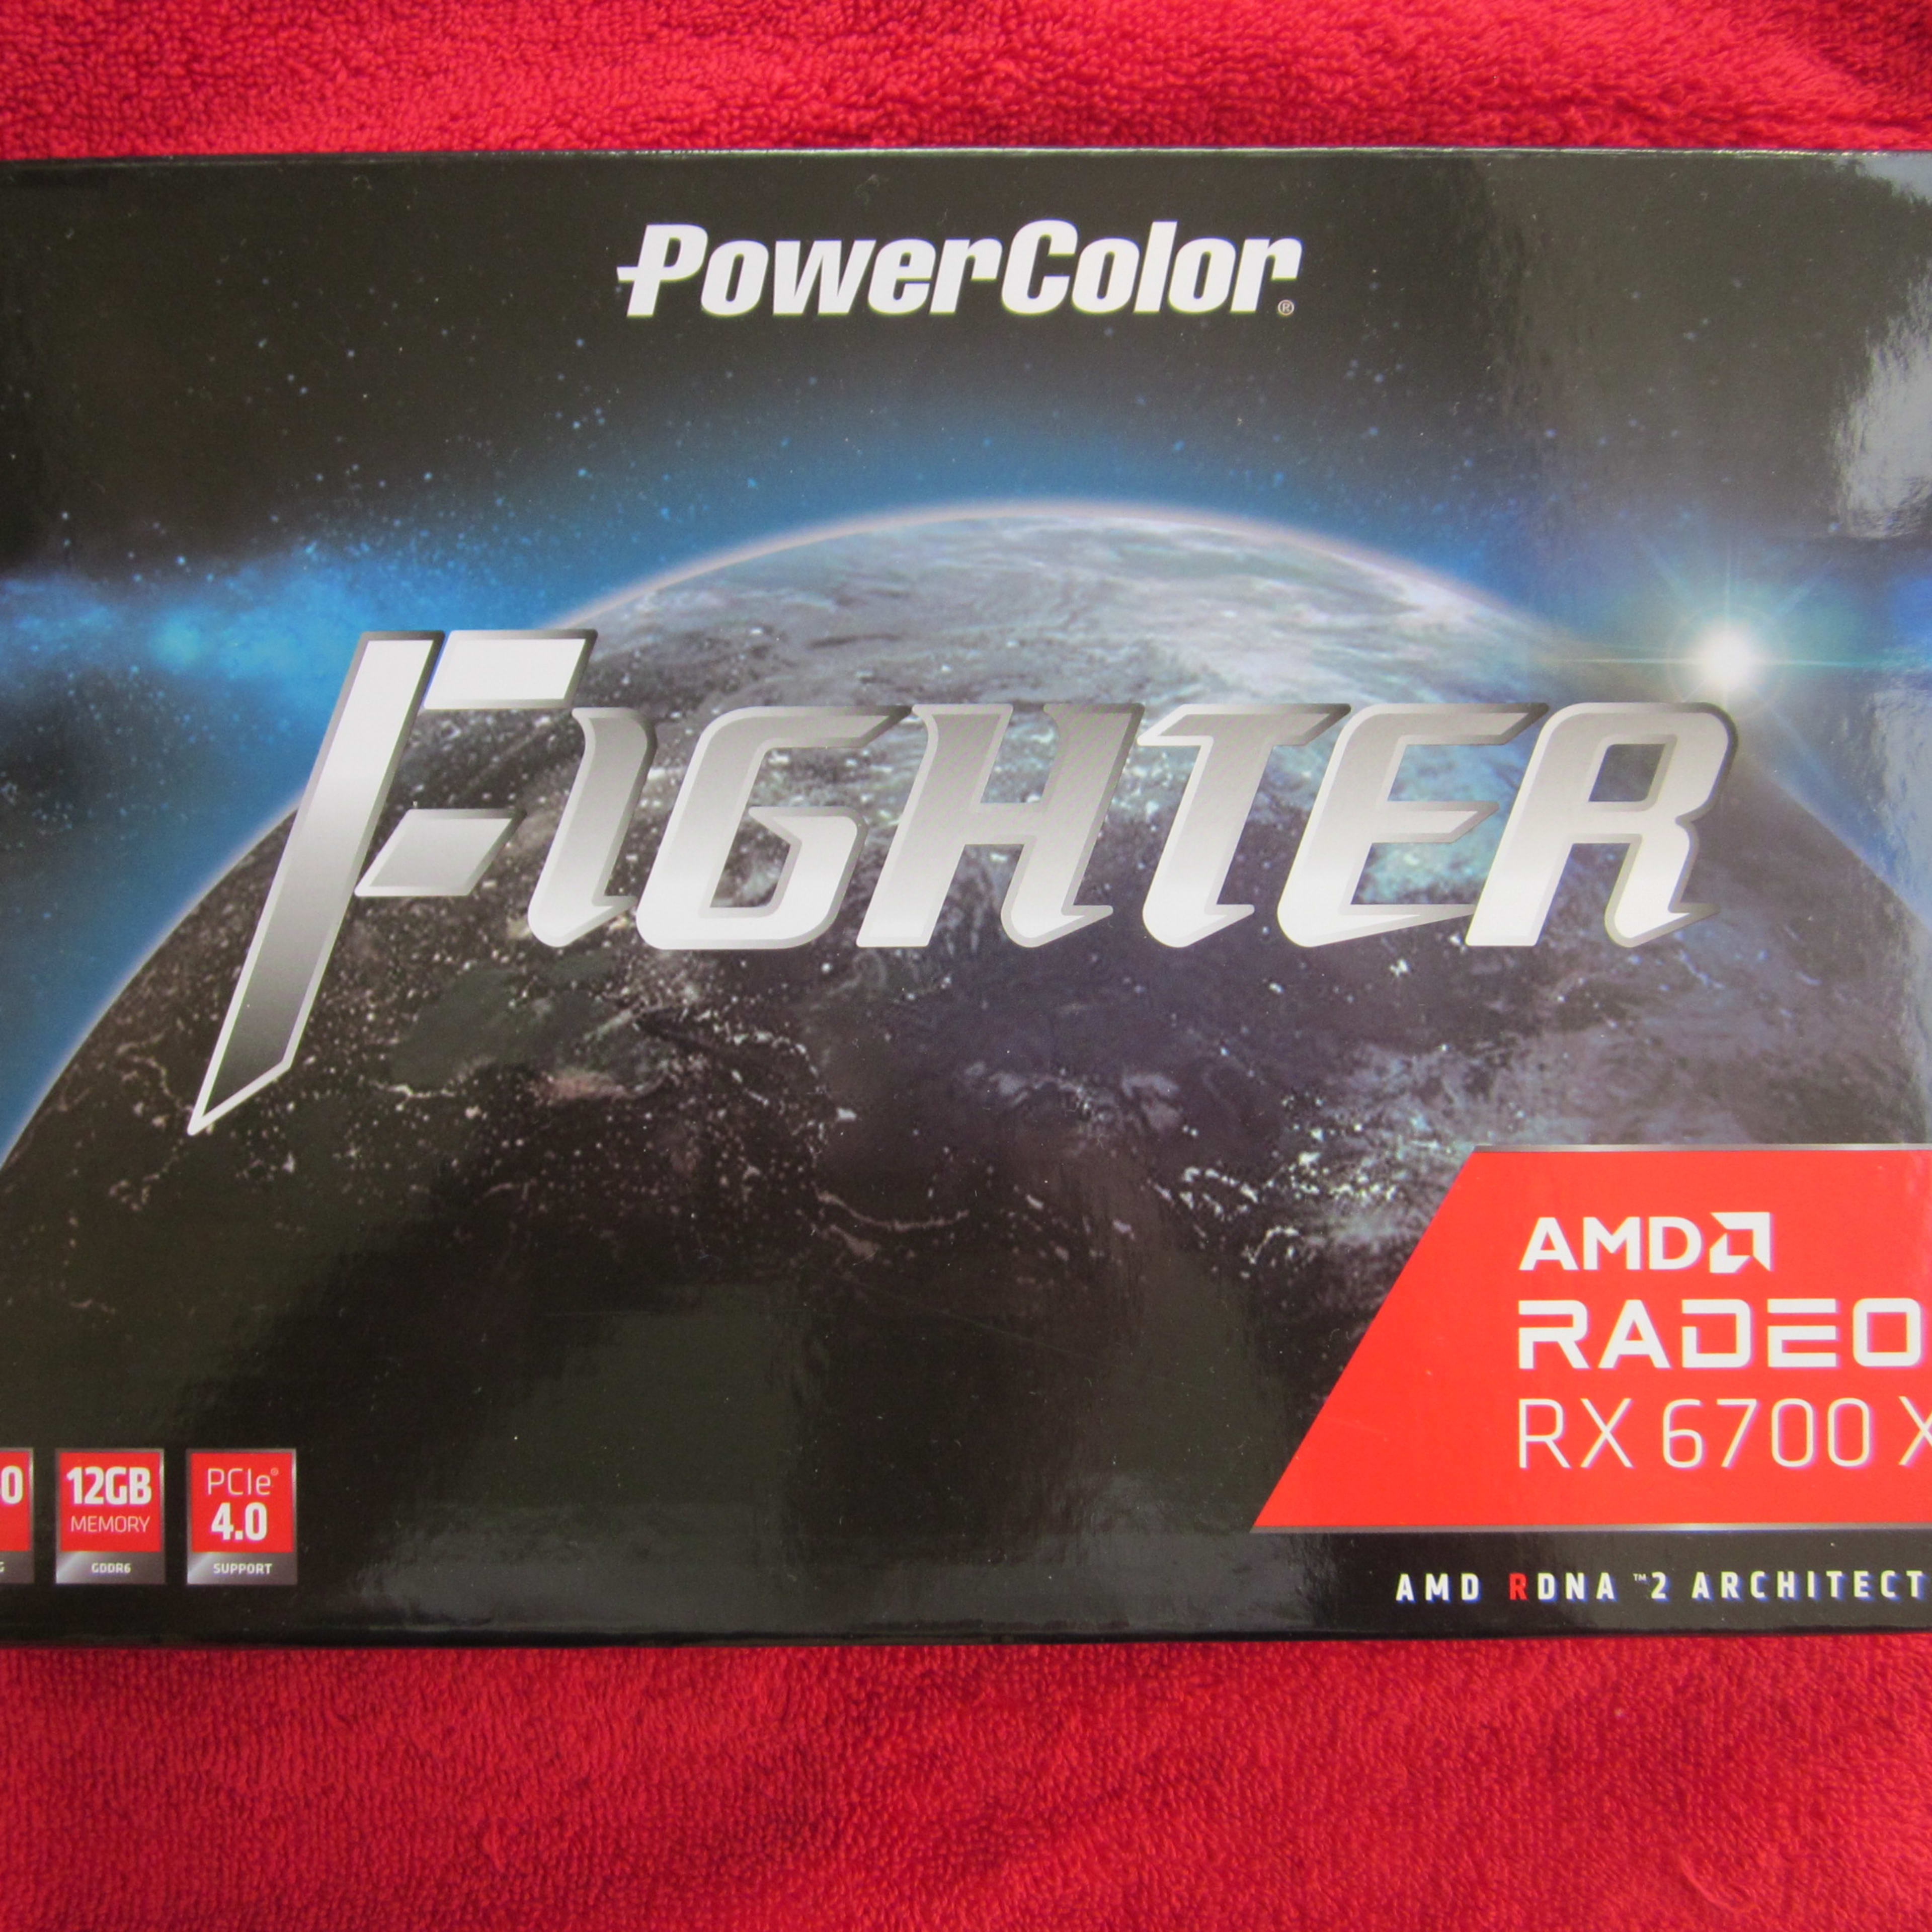 PowerColor Fighter AMD Radeon RX 6700 XT Gaming Graphics Card with 12GB  GDDR6